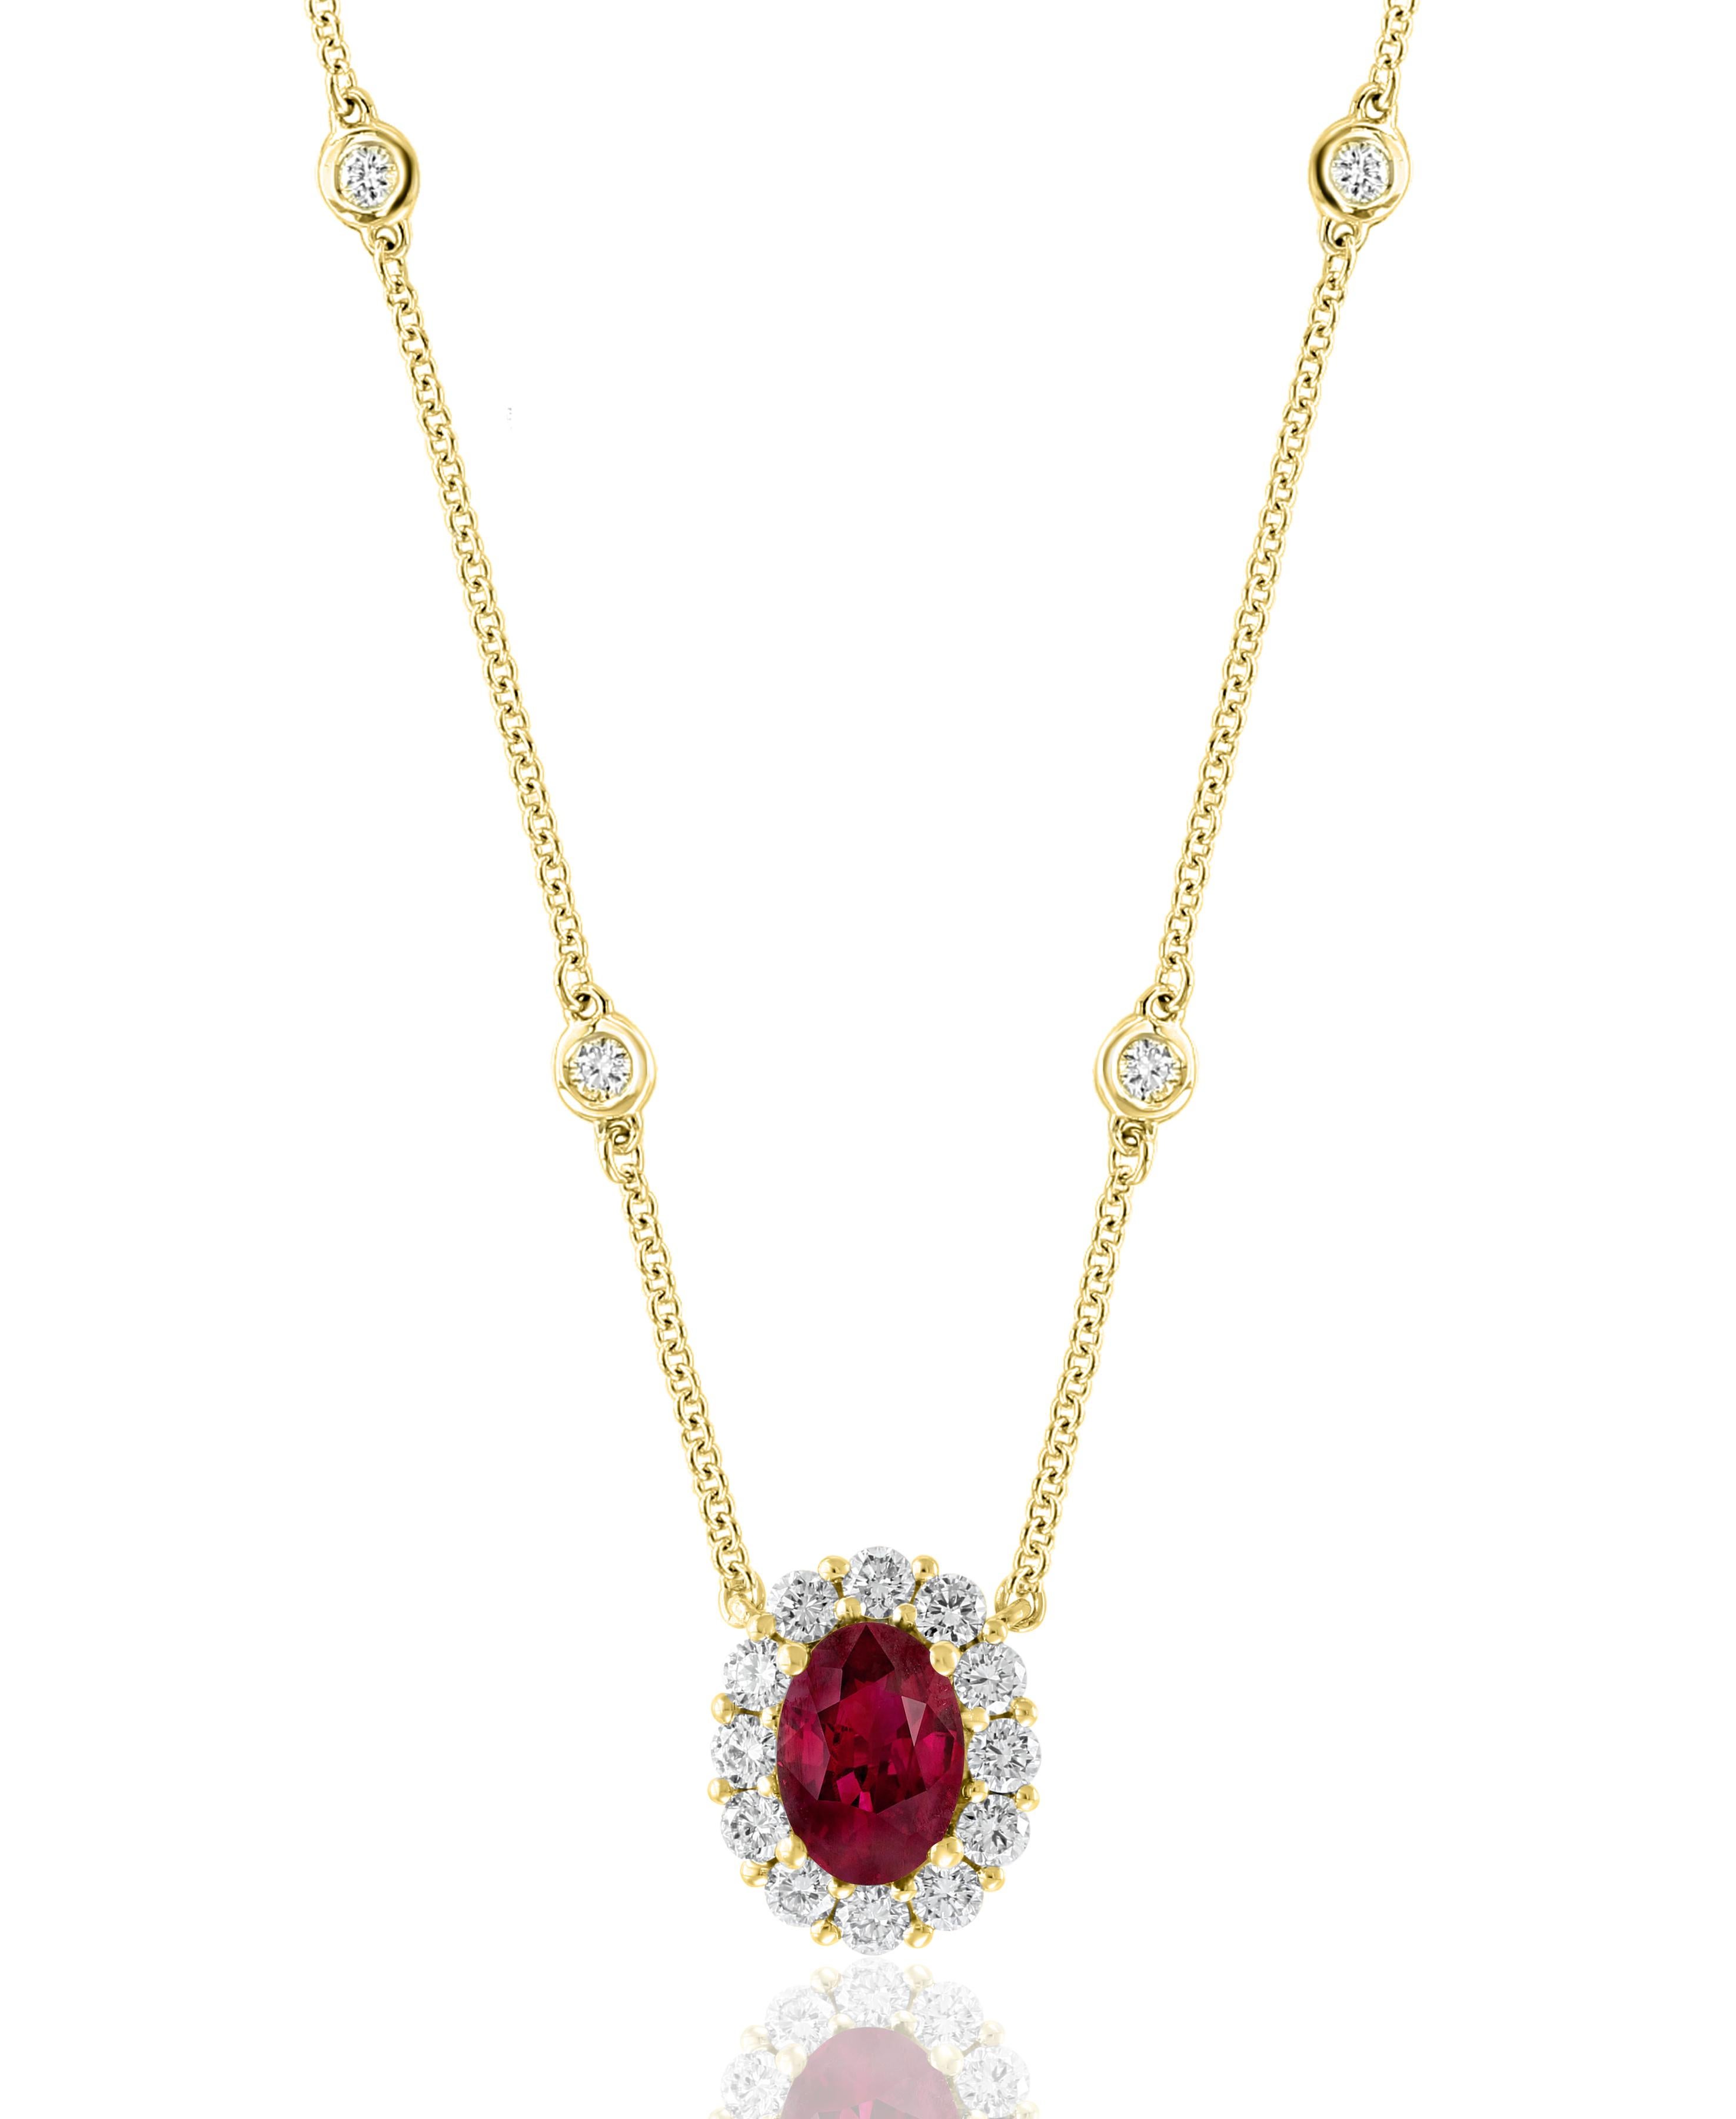 Women's 0.71 Carat Oval Cut Ruby and Diamond Pendant Necklace in 14K Yellow Gold For Sale